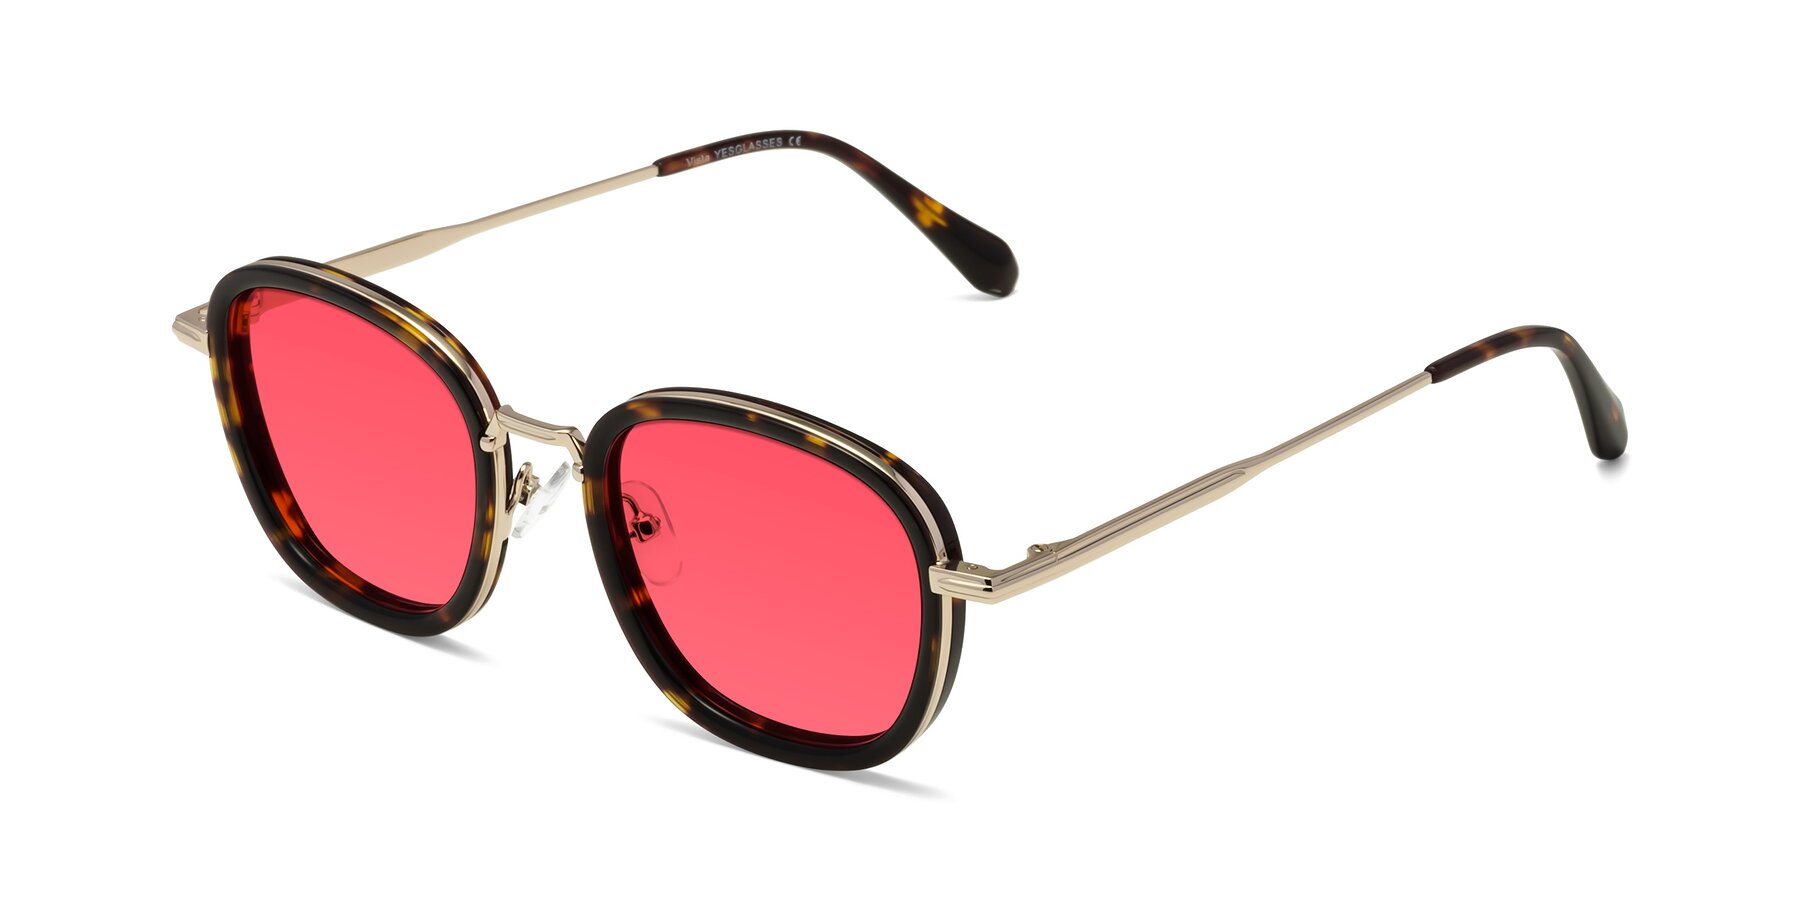 Angle of Vista in Tortoise-Light Gold with Red Tinted Lenses